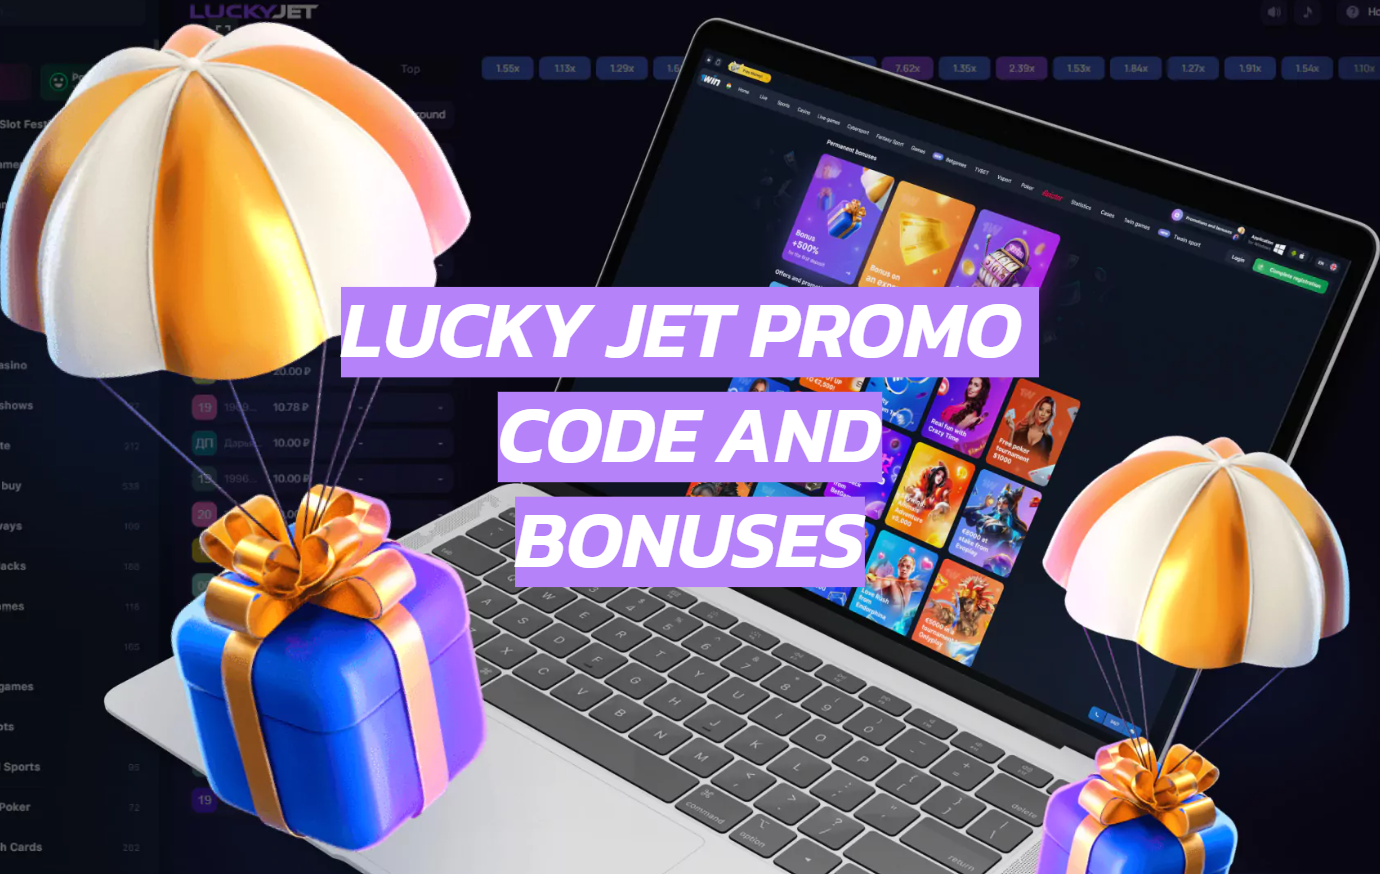 Lucky Jet Promo Code and Bonuses